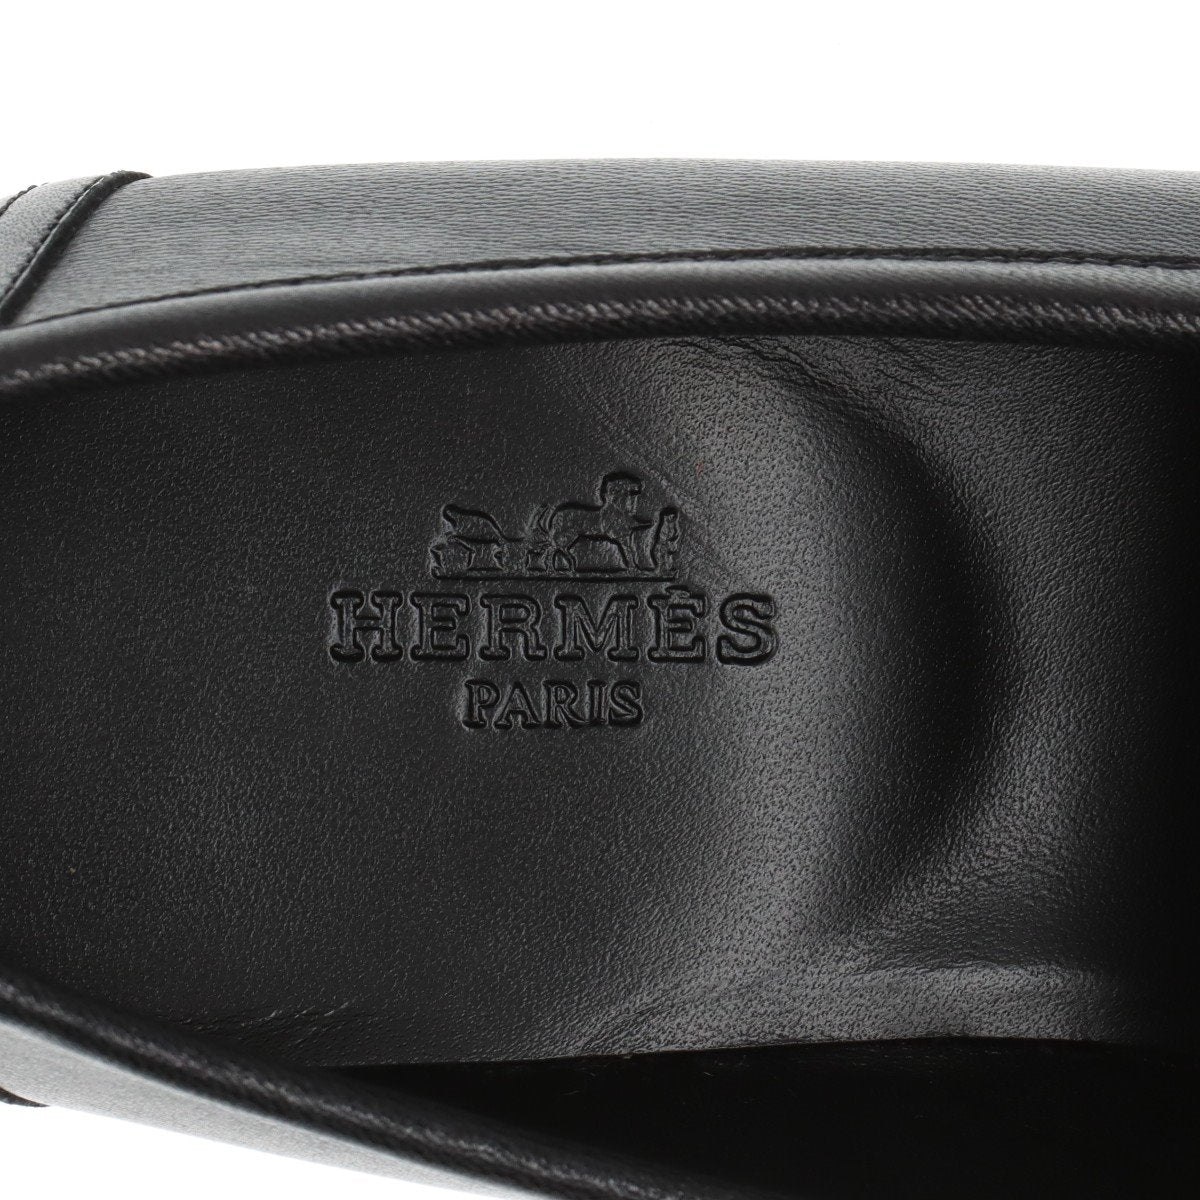 Hermes Leather Loafers 37 Black Constance